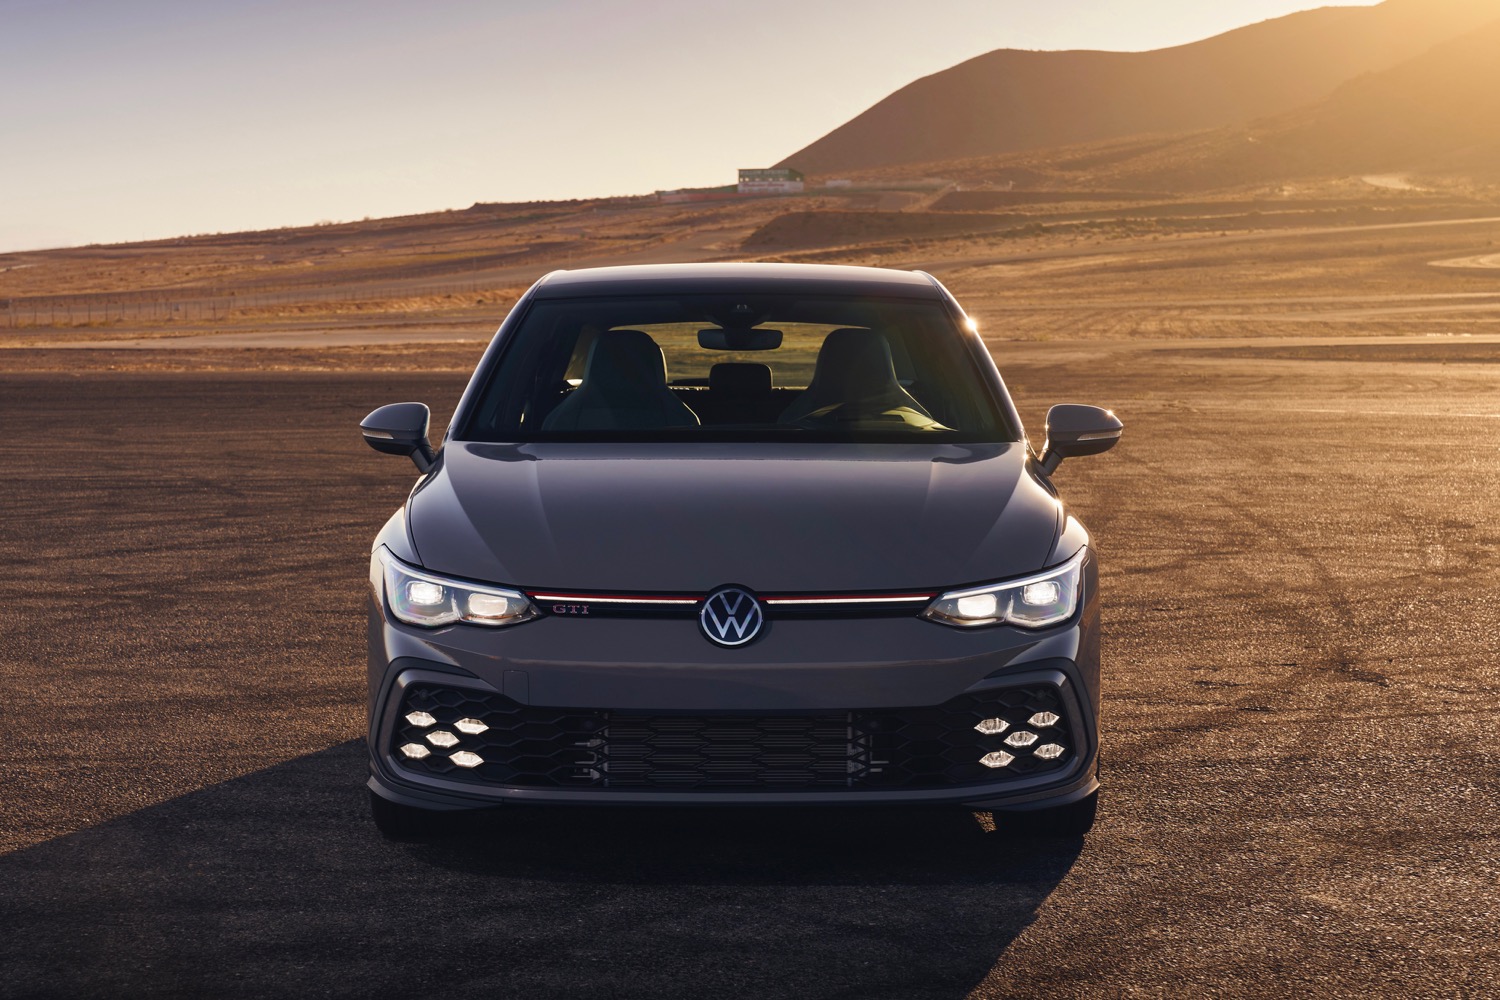 Here's your first look at the new Mk8.5 Volkswagen Golf GTI